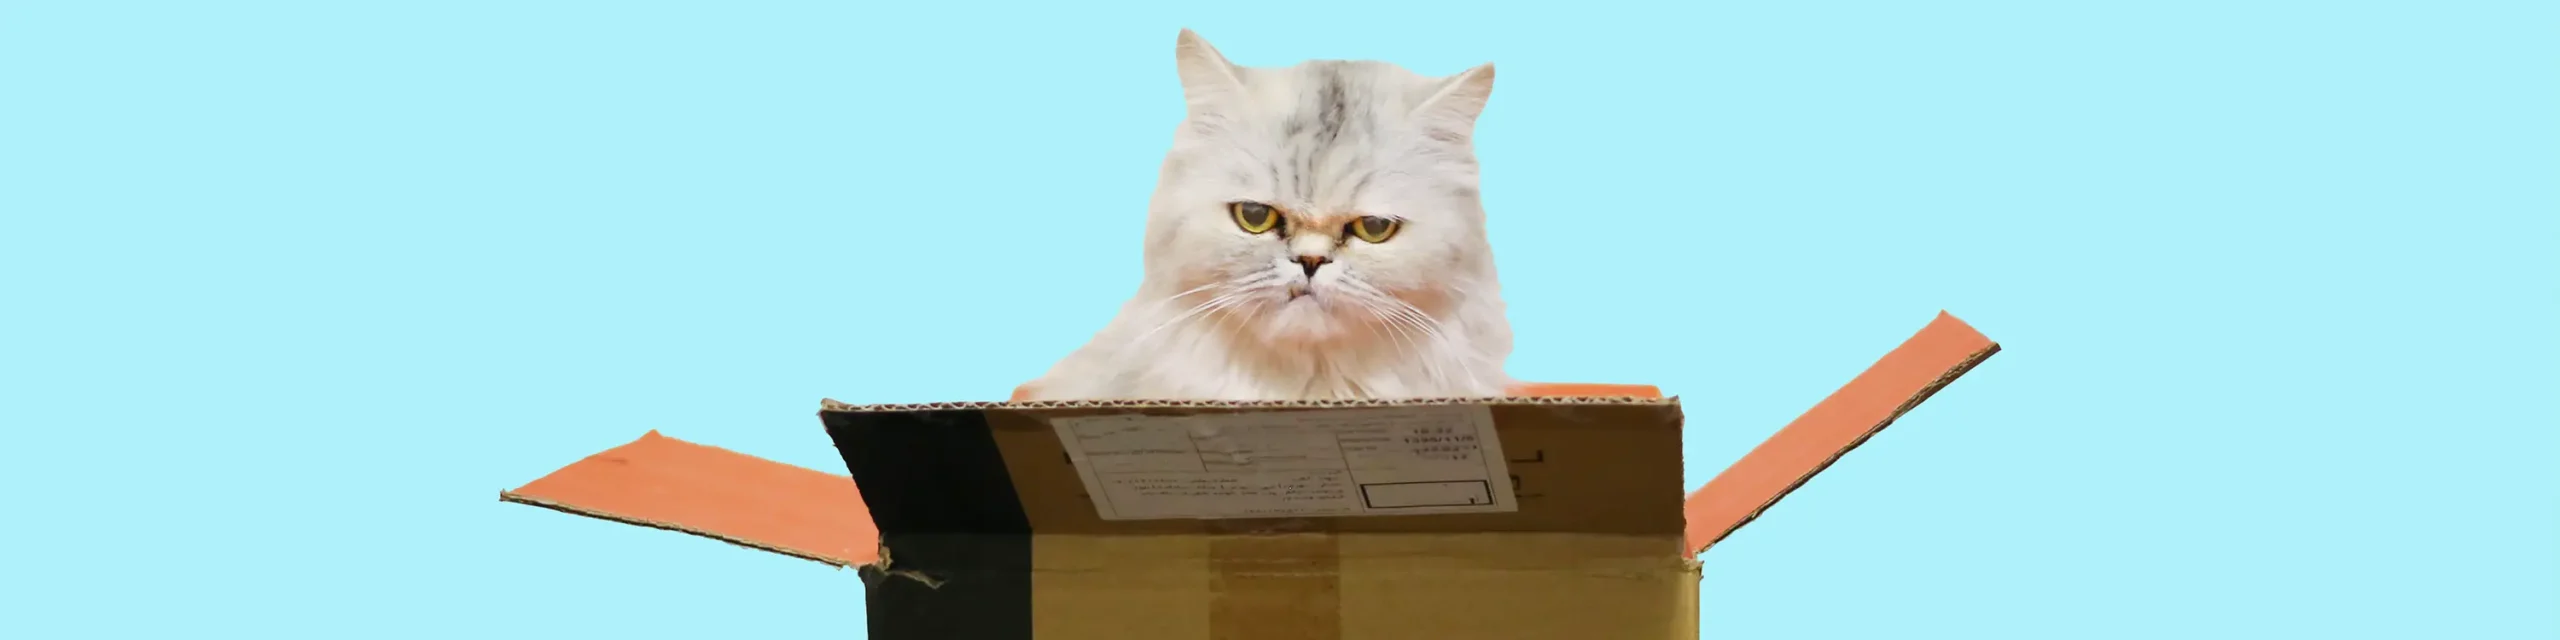 Cat head sticking out of cardboard moving box